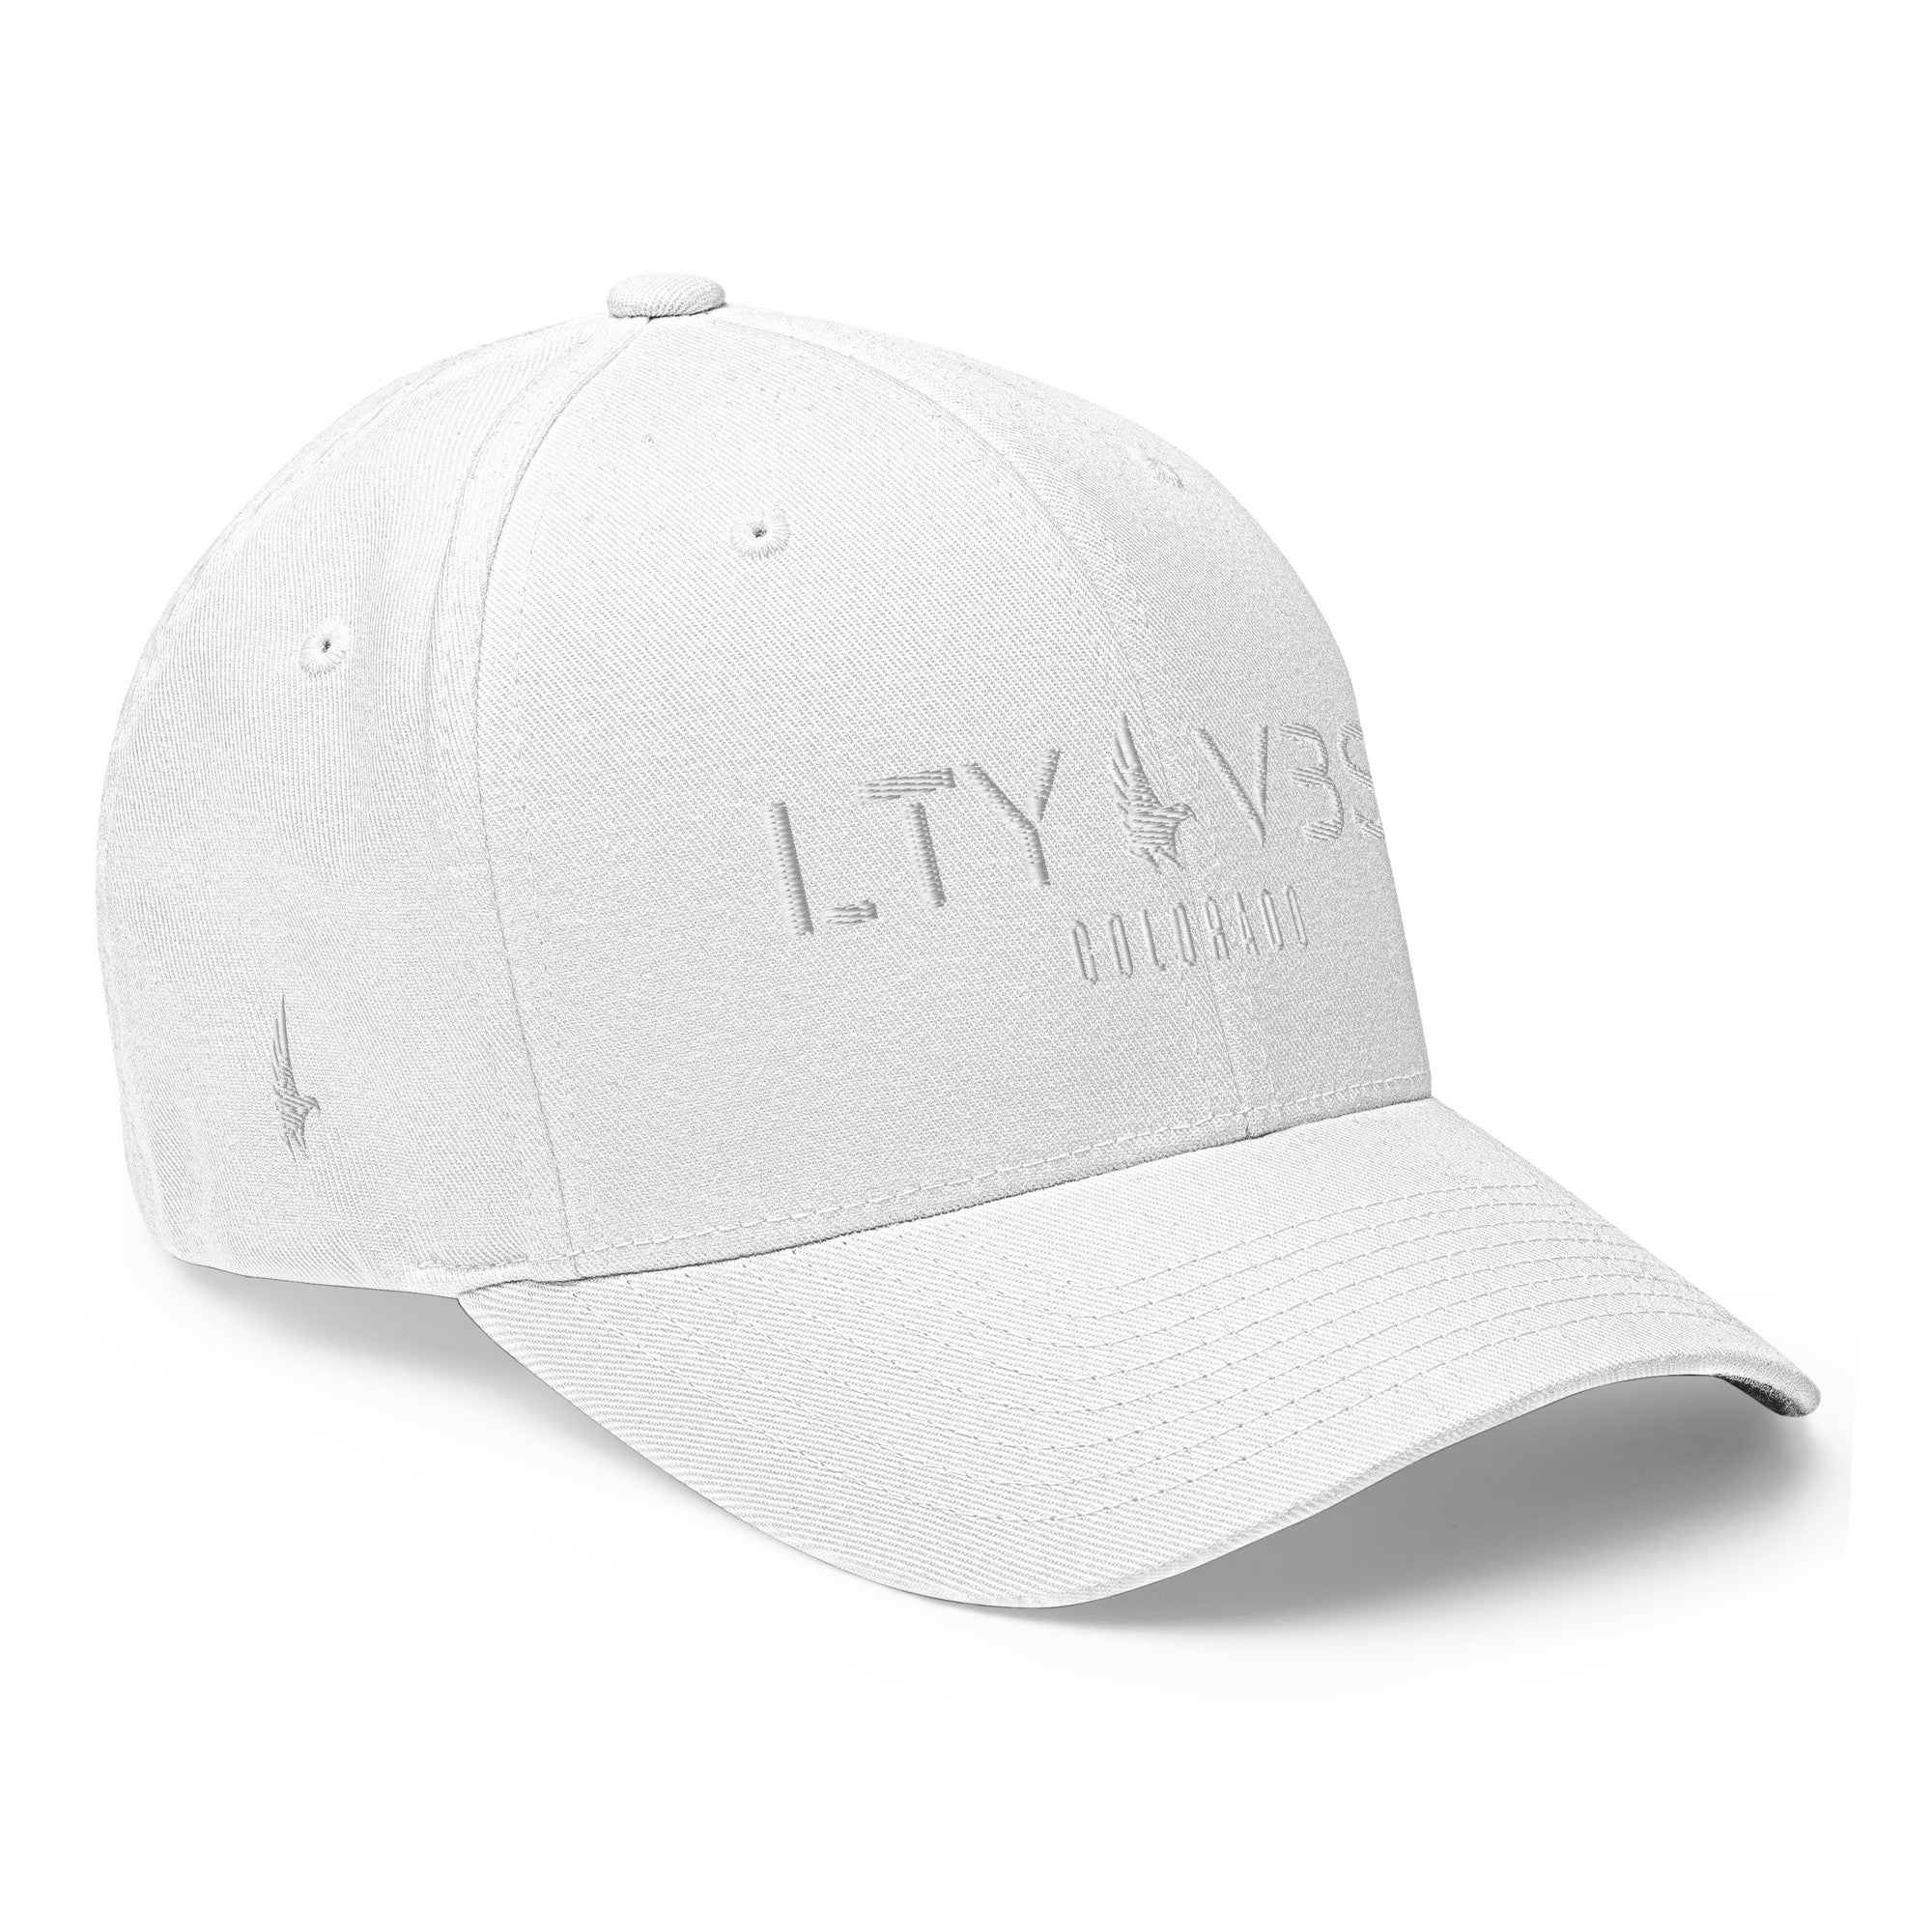 Loyalty Era Colorado Fitted Hat - White / White Fitted - Loyalty Vibes